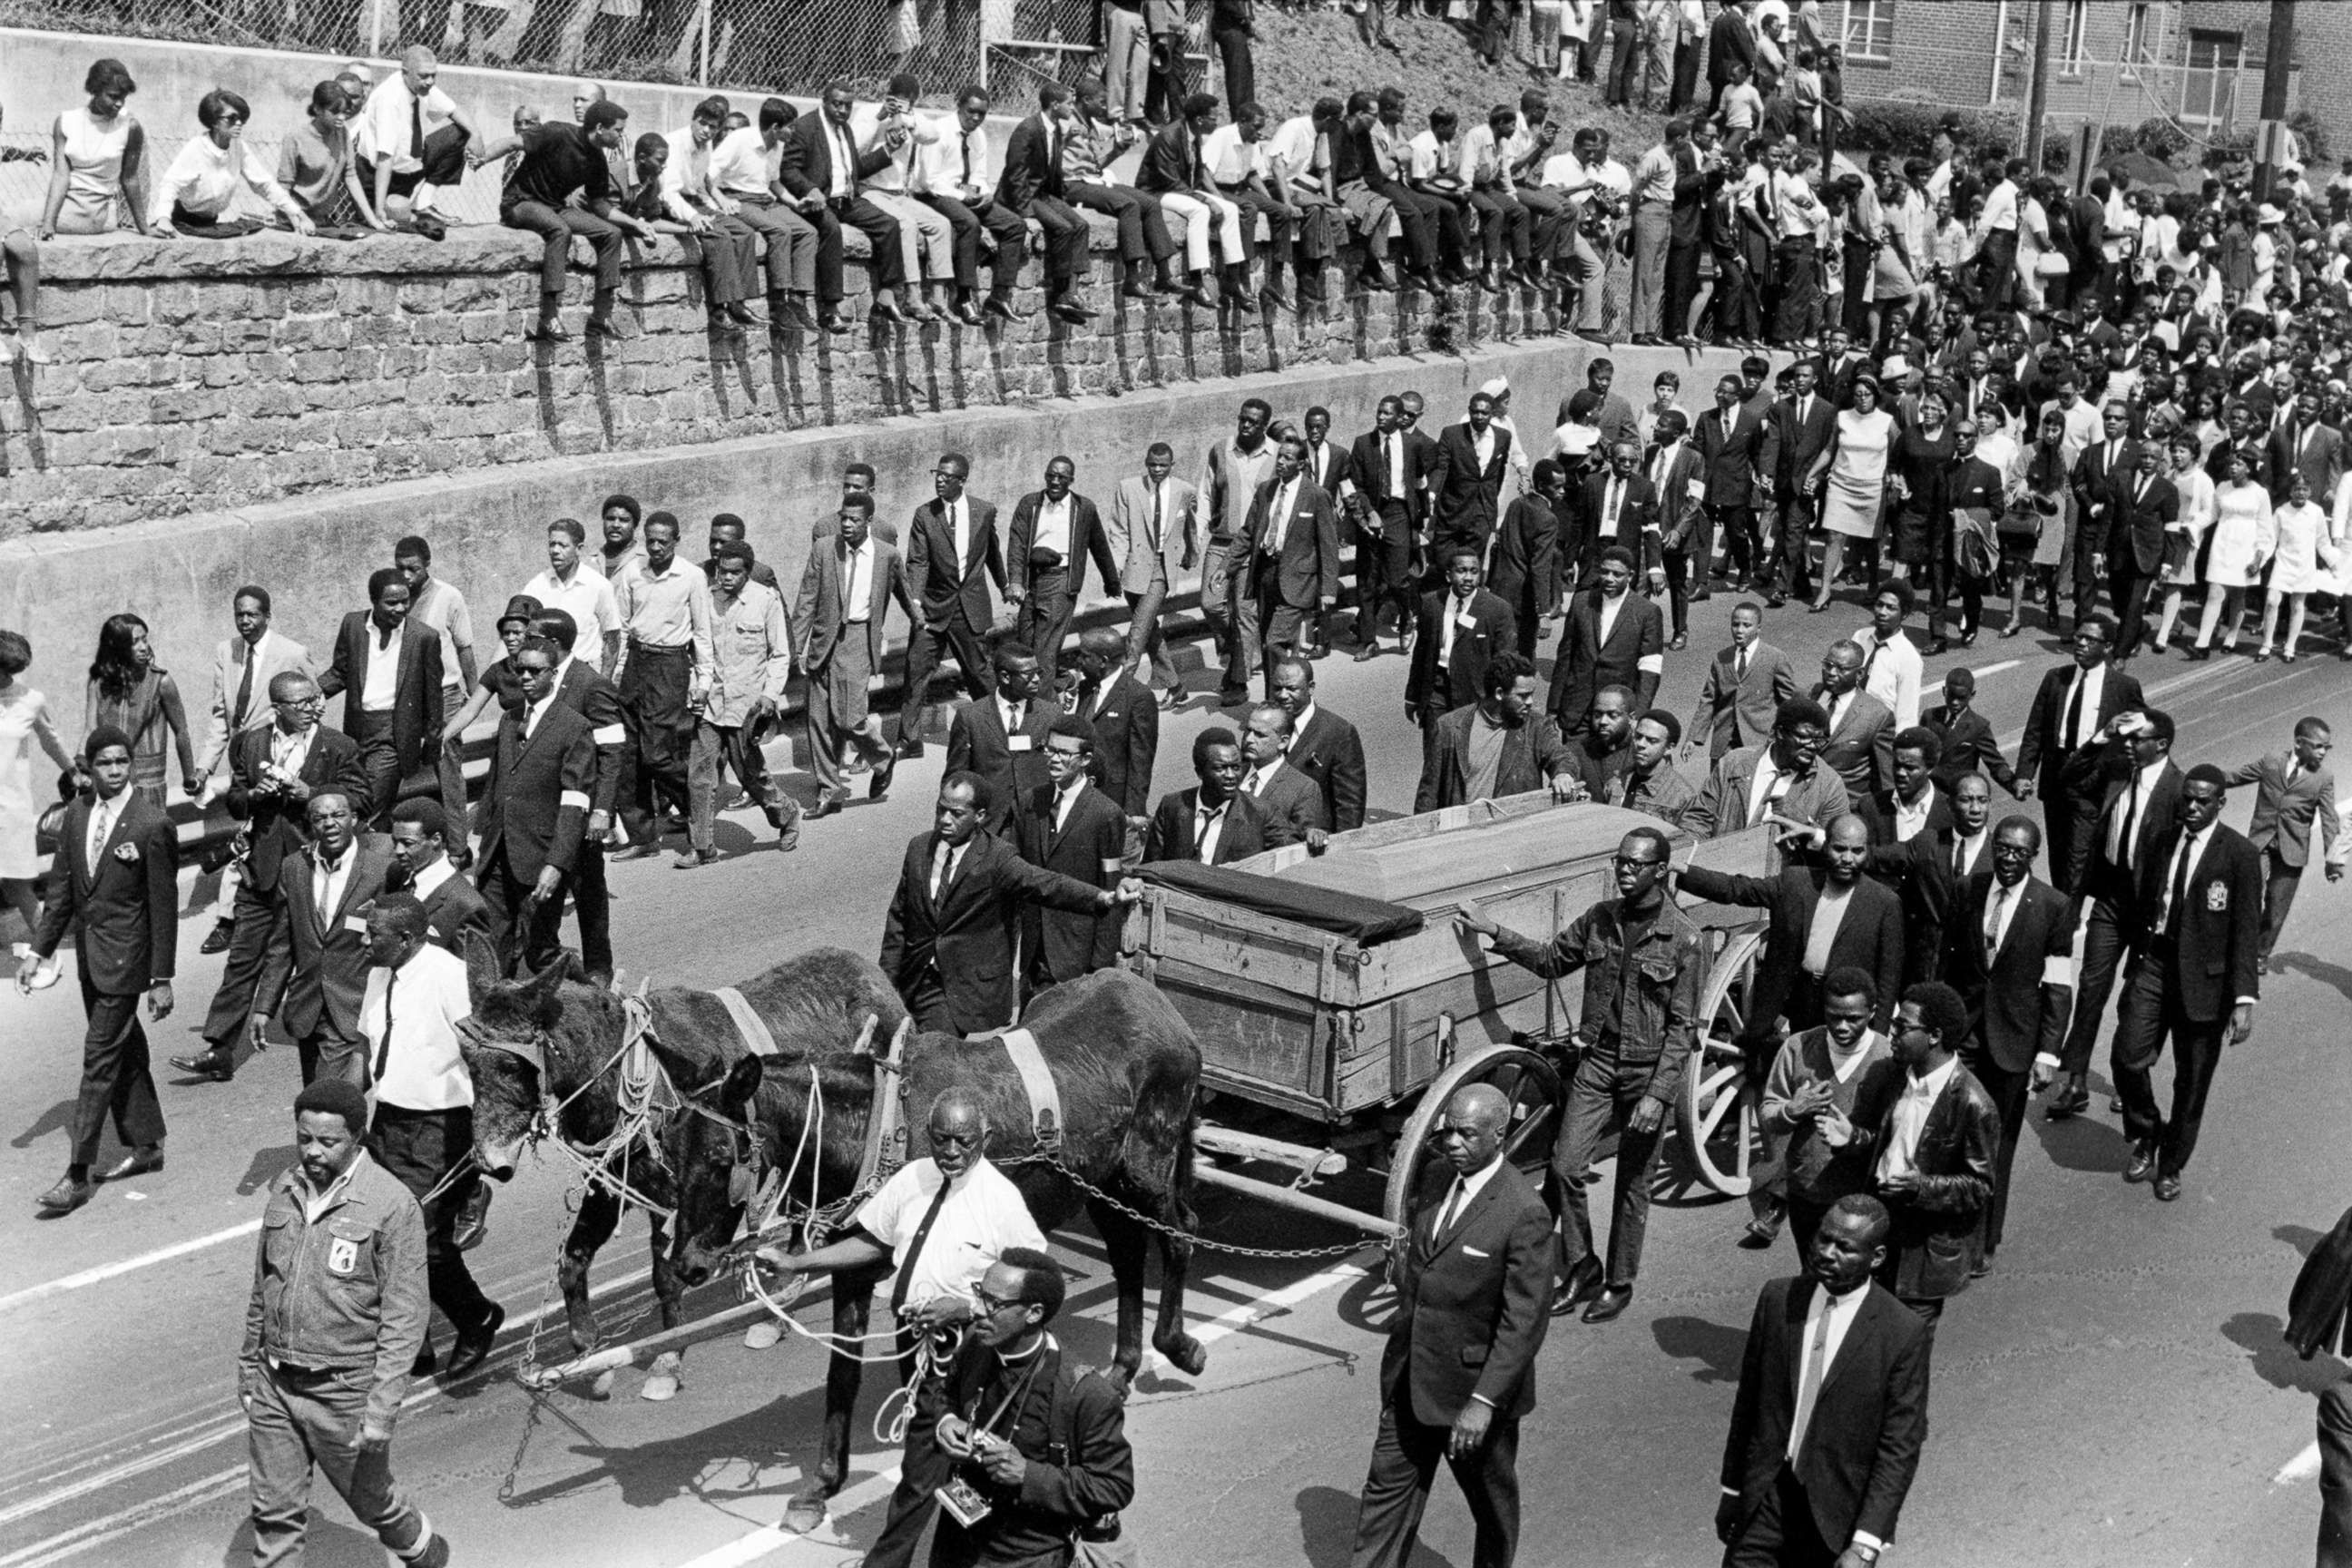 PHOTO: View of the casket of the Reverend Martin Luther King, Jr loaded onto a wooden farm wagon and pulled by mules during his funeral procession in Atlanta, Georgia, April 9, 1968. 